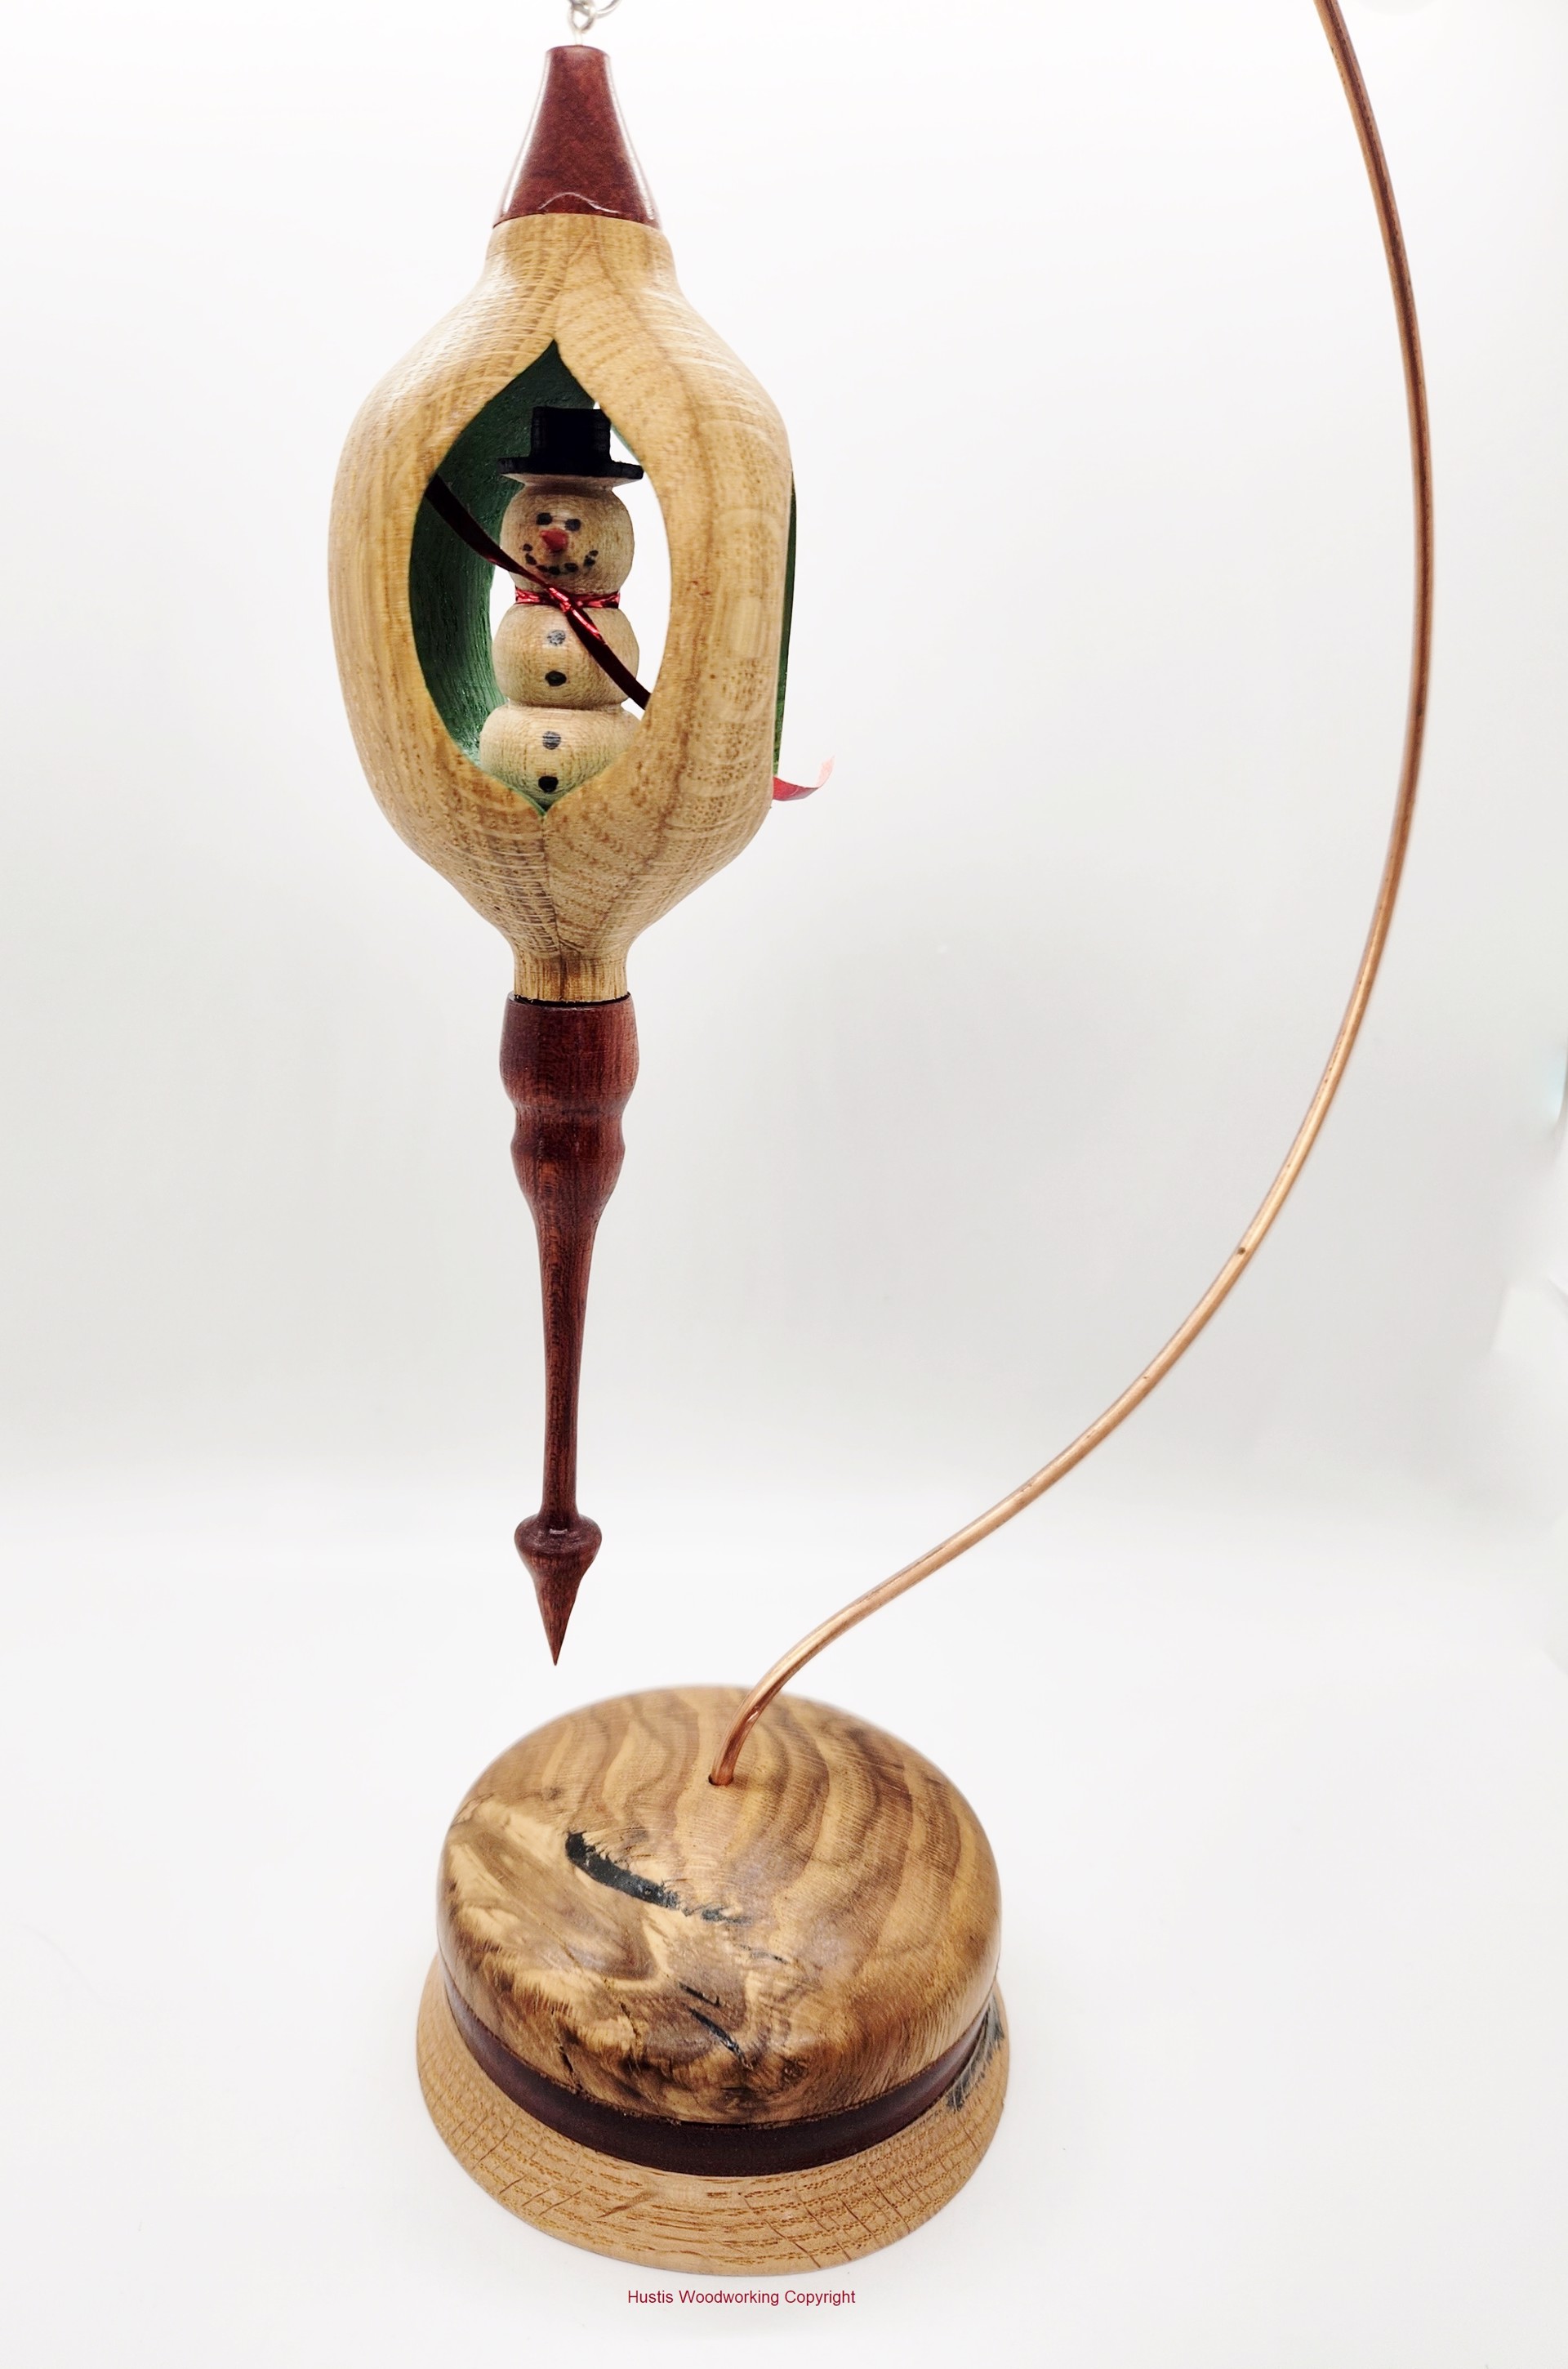 Woodturned Ornament, Green with Snowman by Mark Hustis